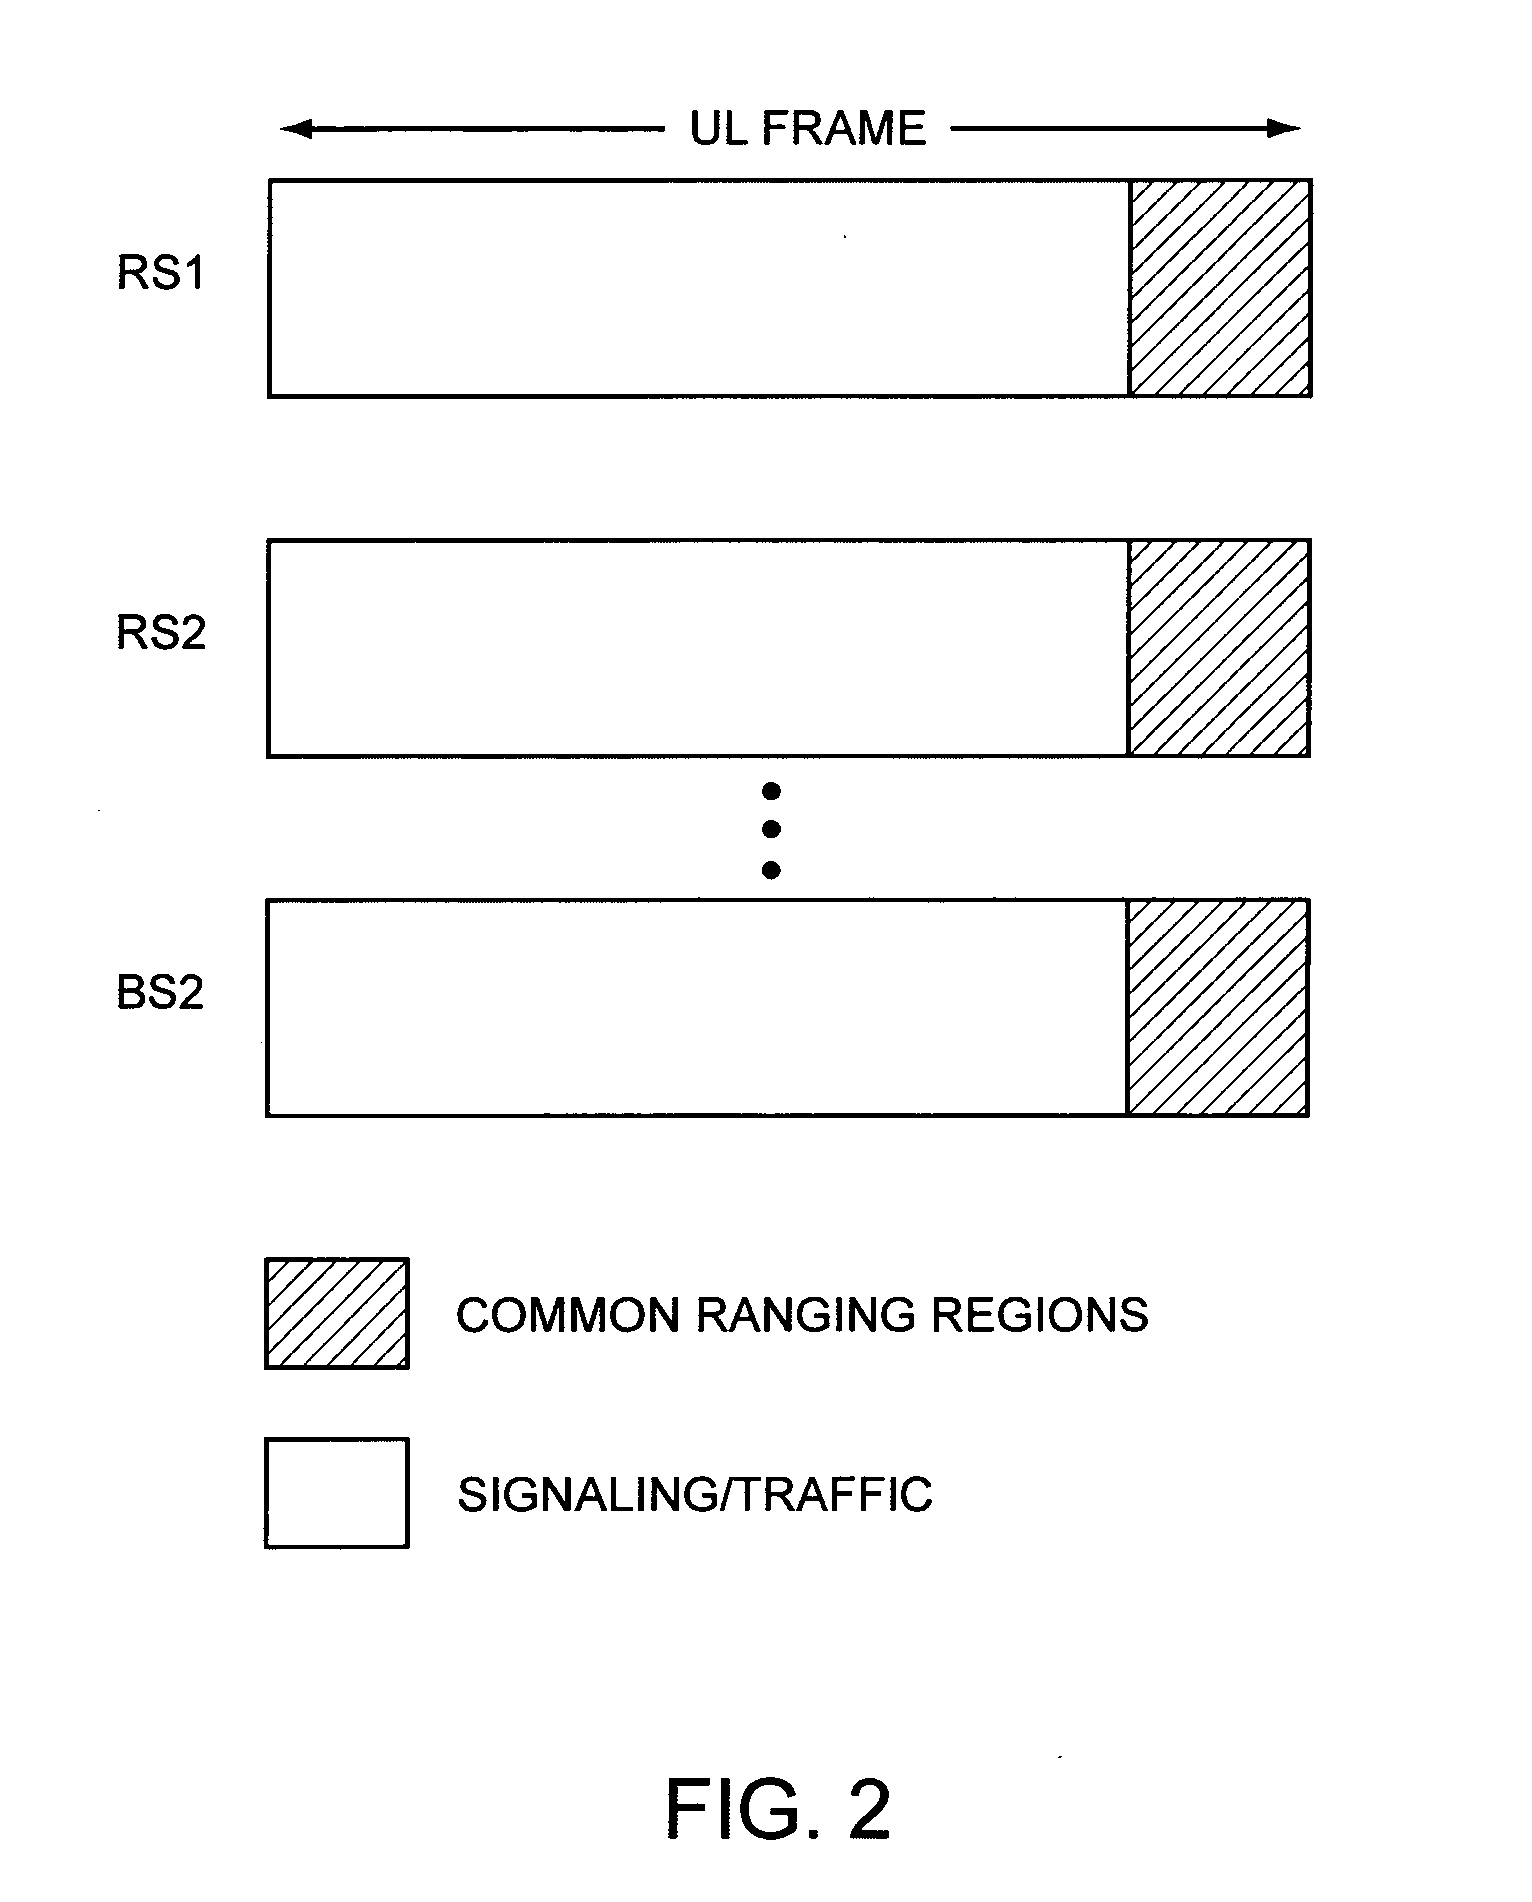 Ranging regions for wireless communication relay stations